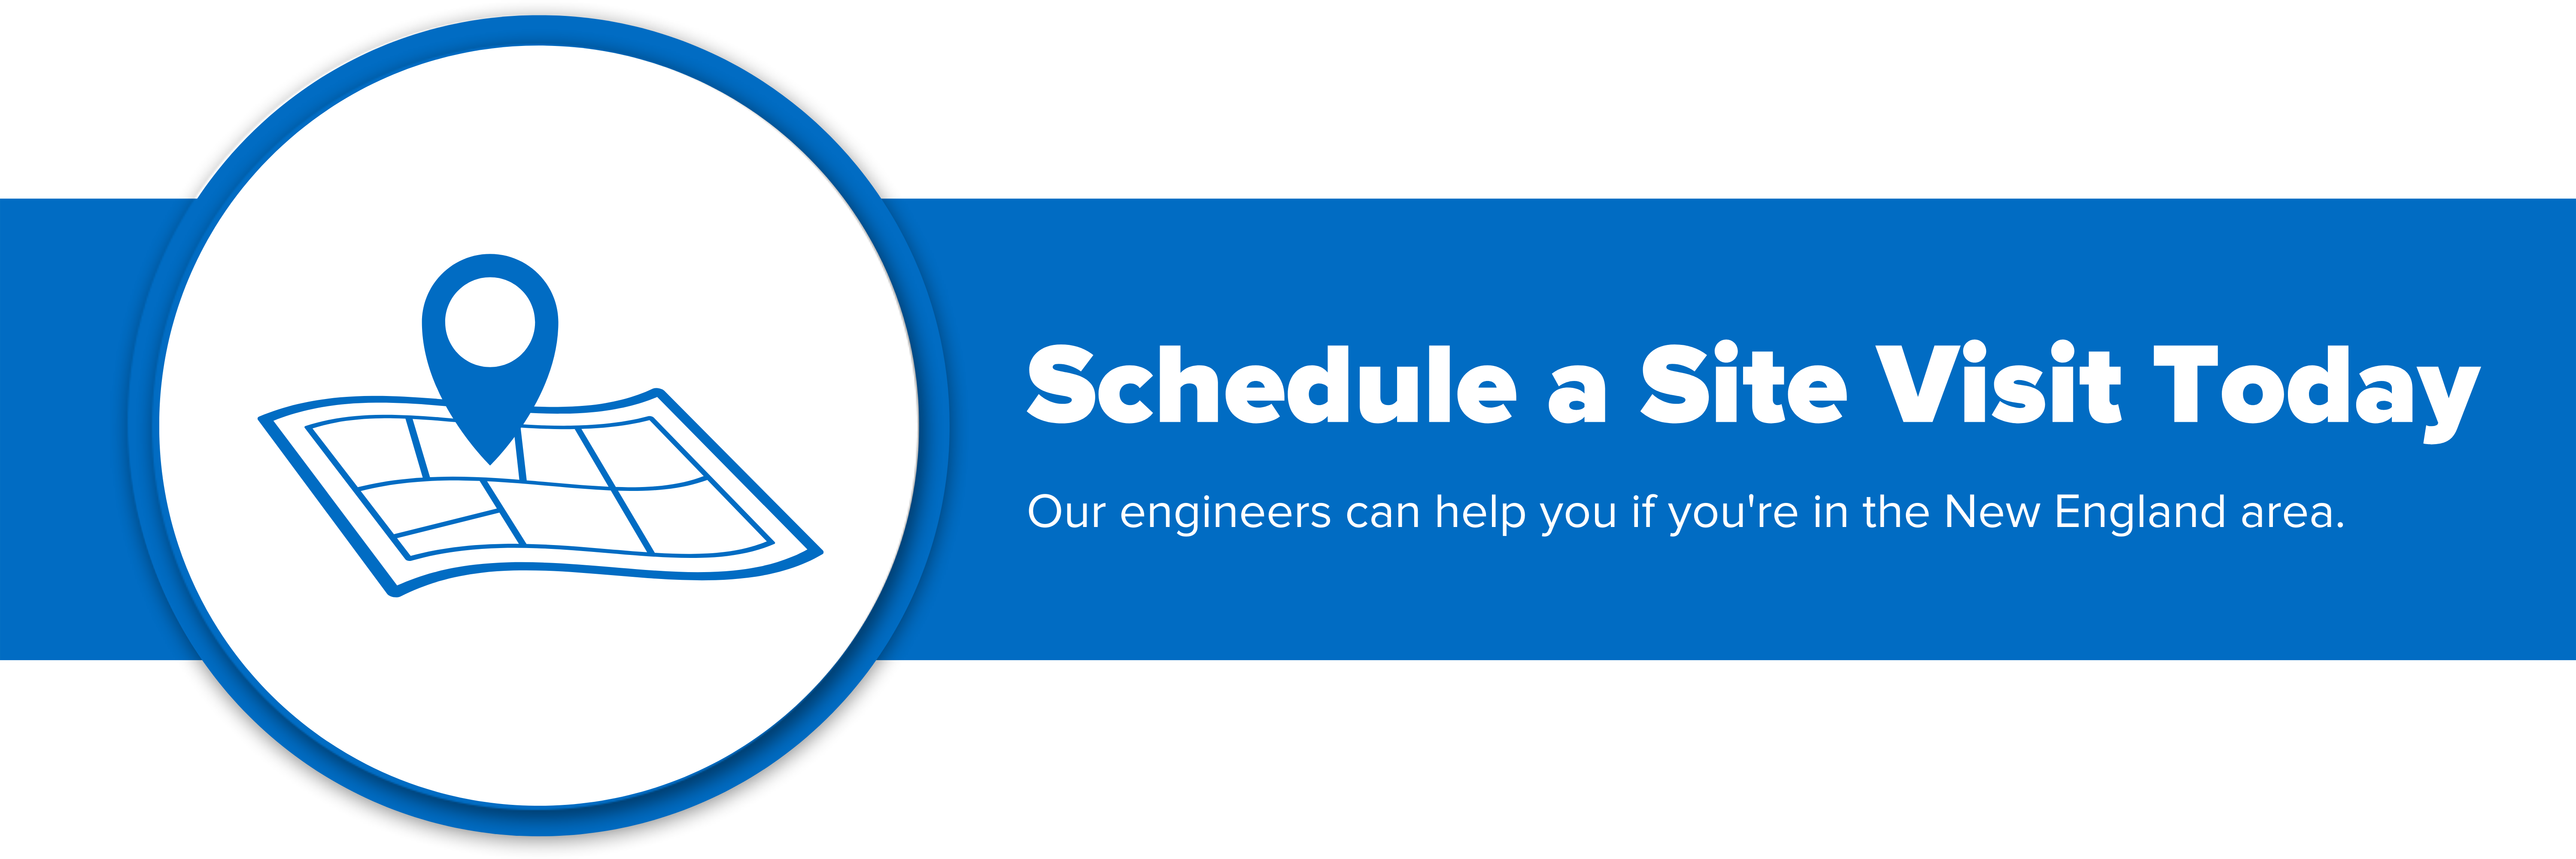 Header image with text "Schedule a Site Visit Today"